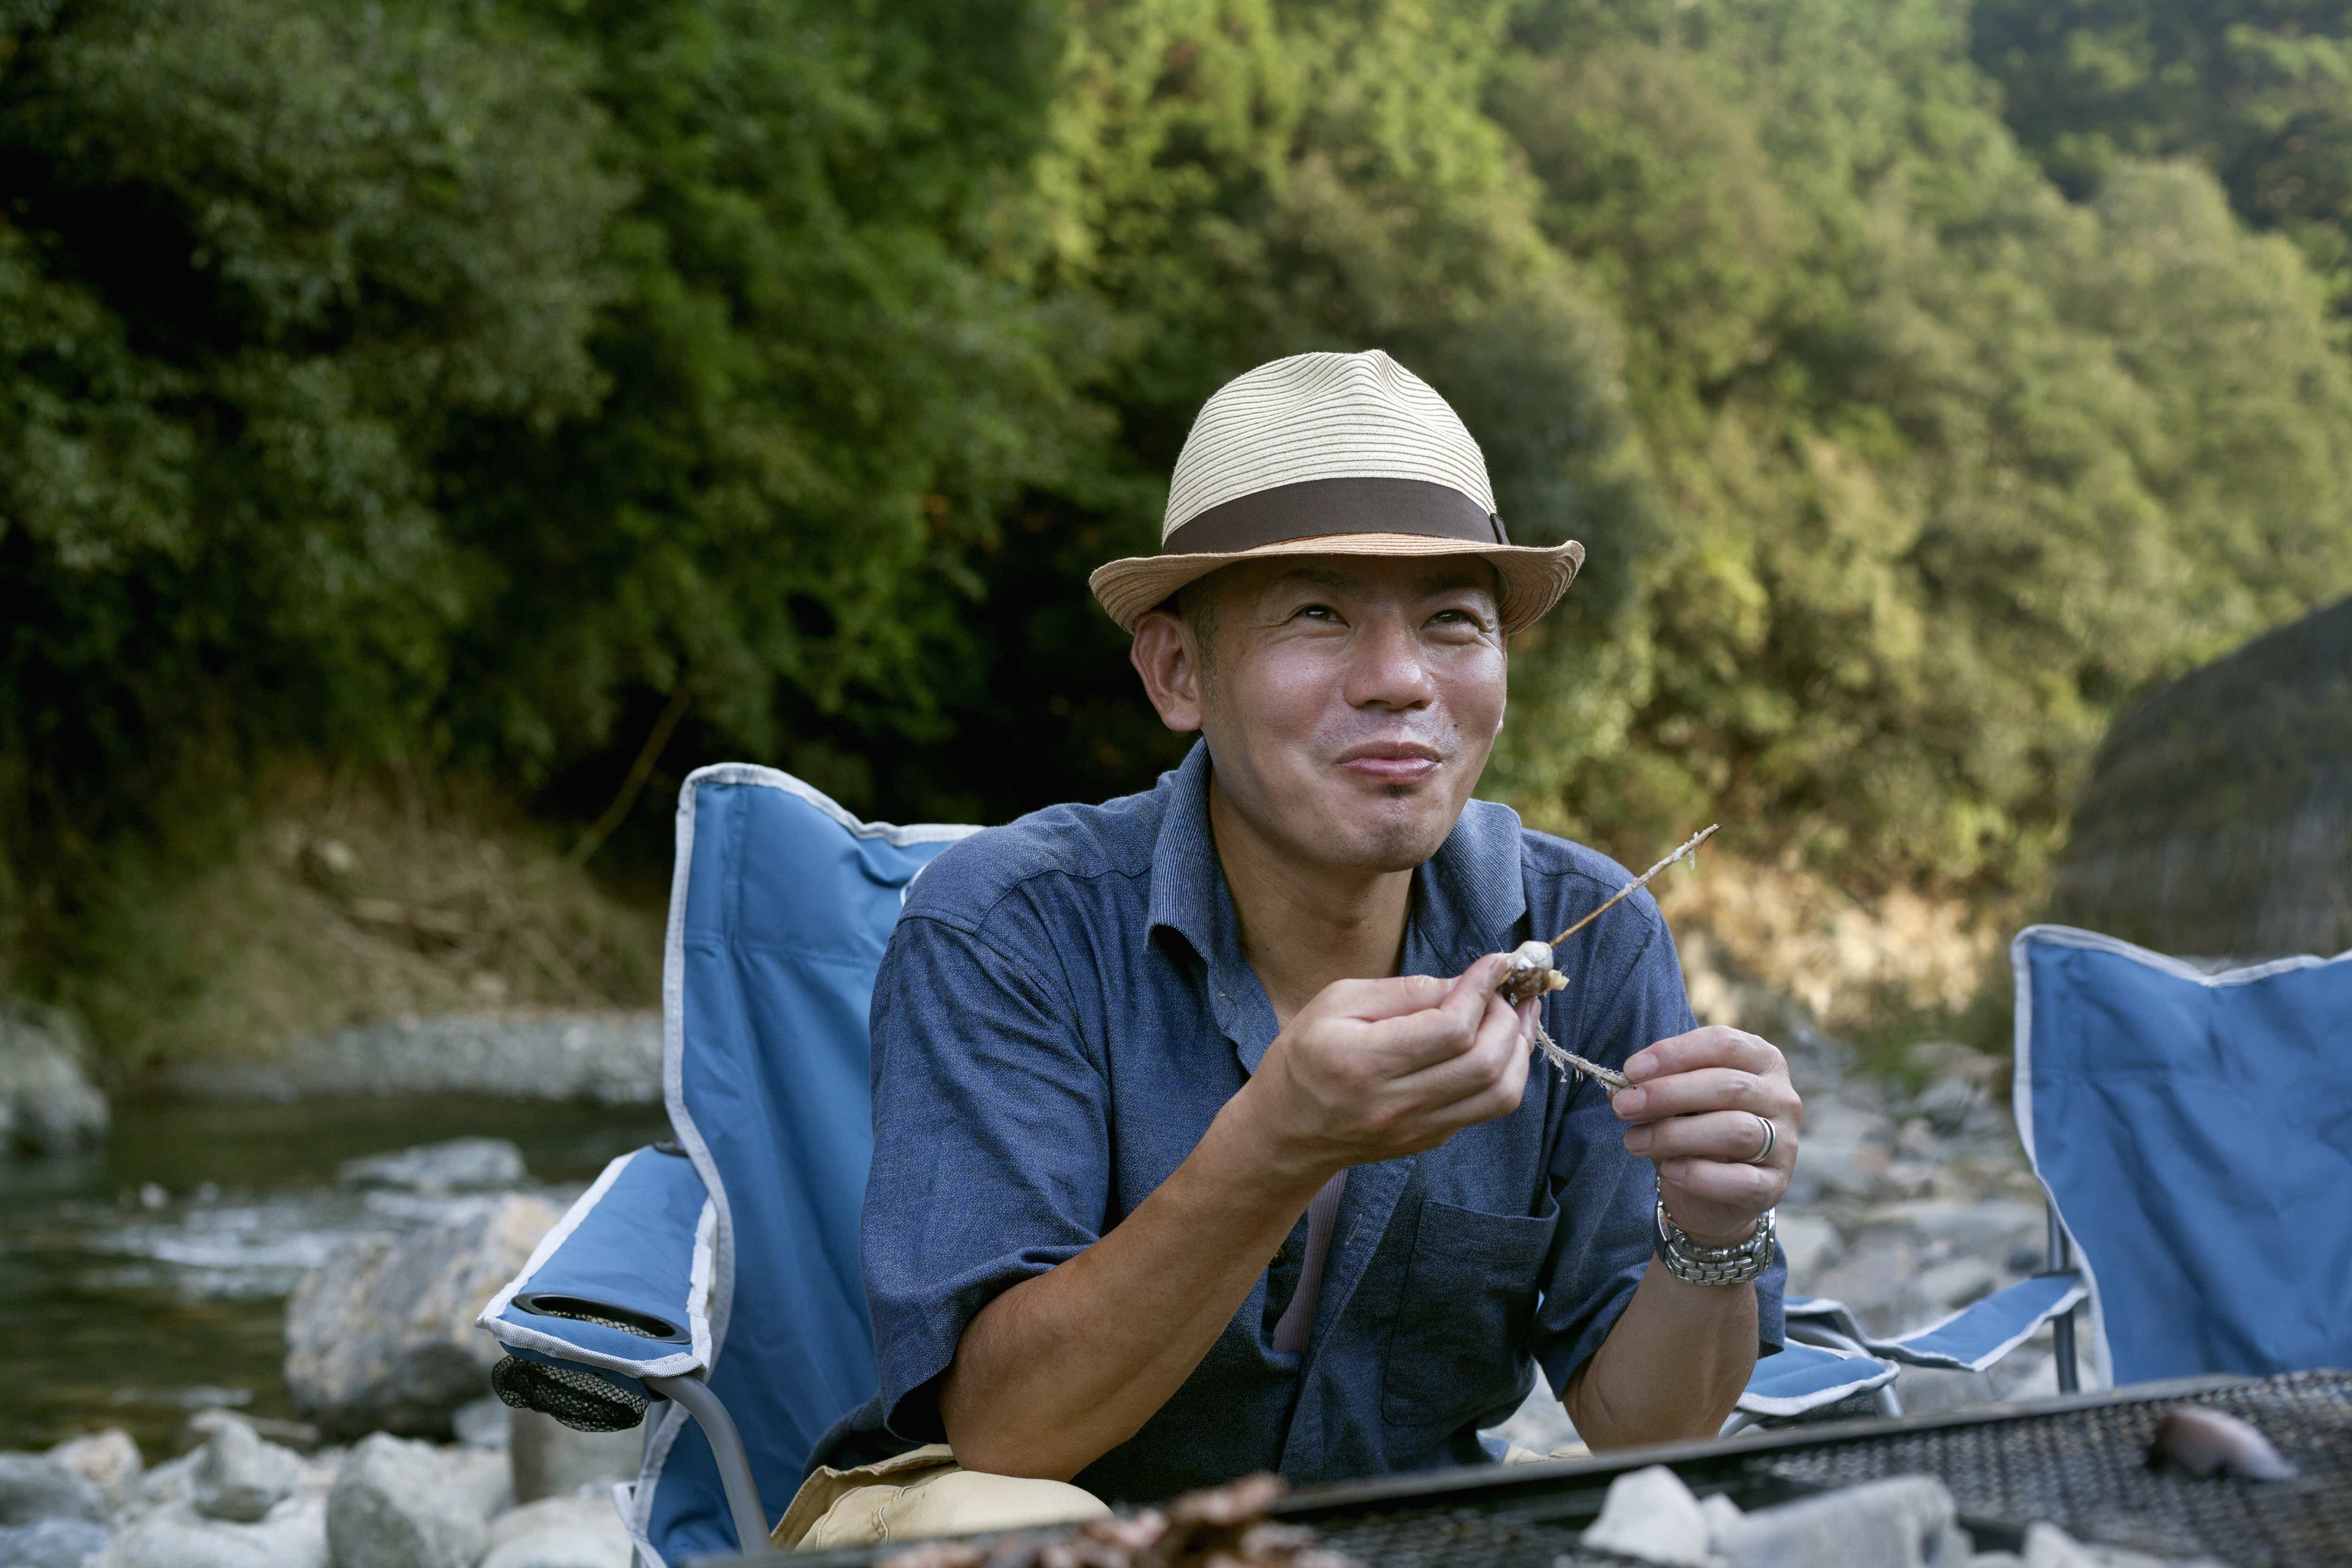 Man eating by the river